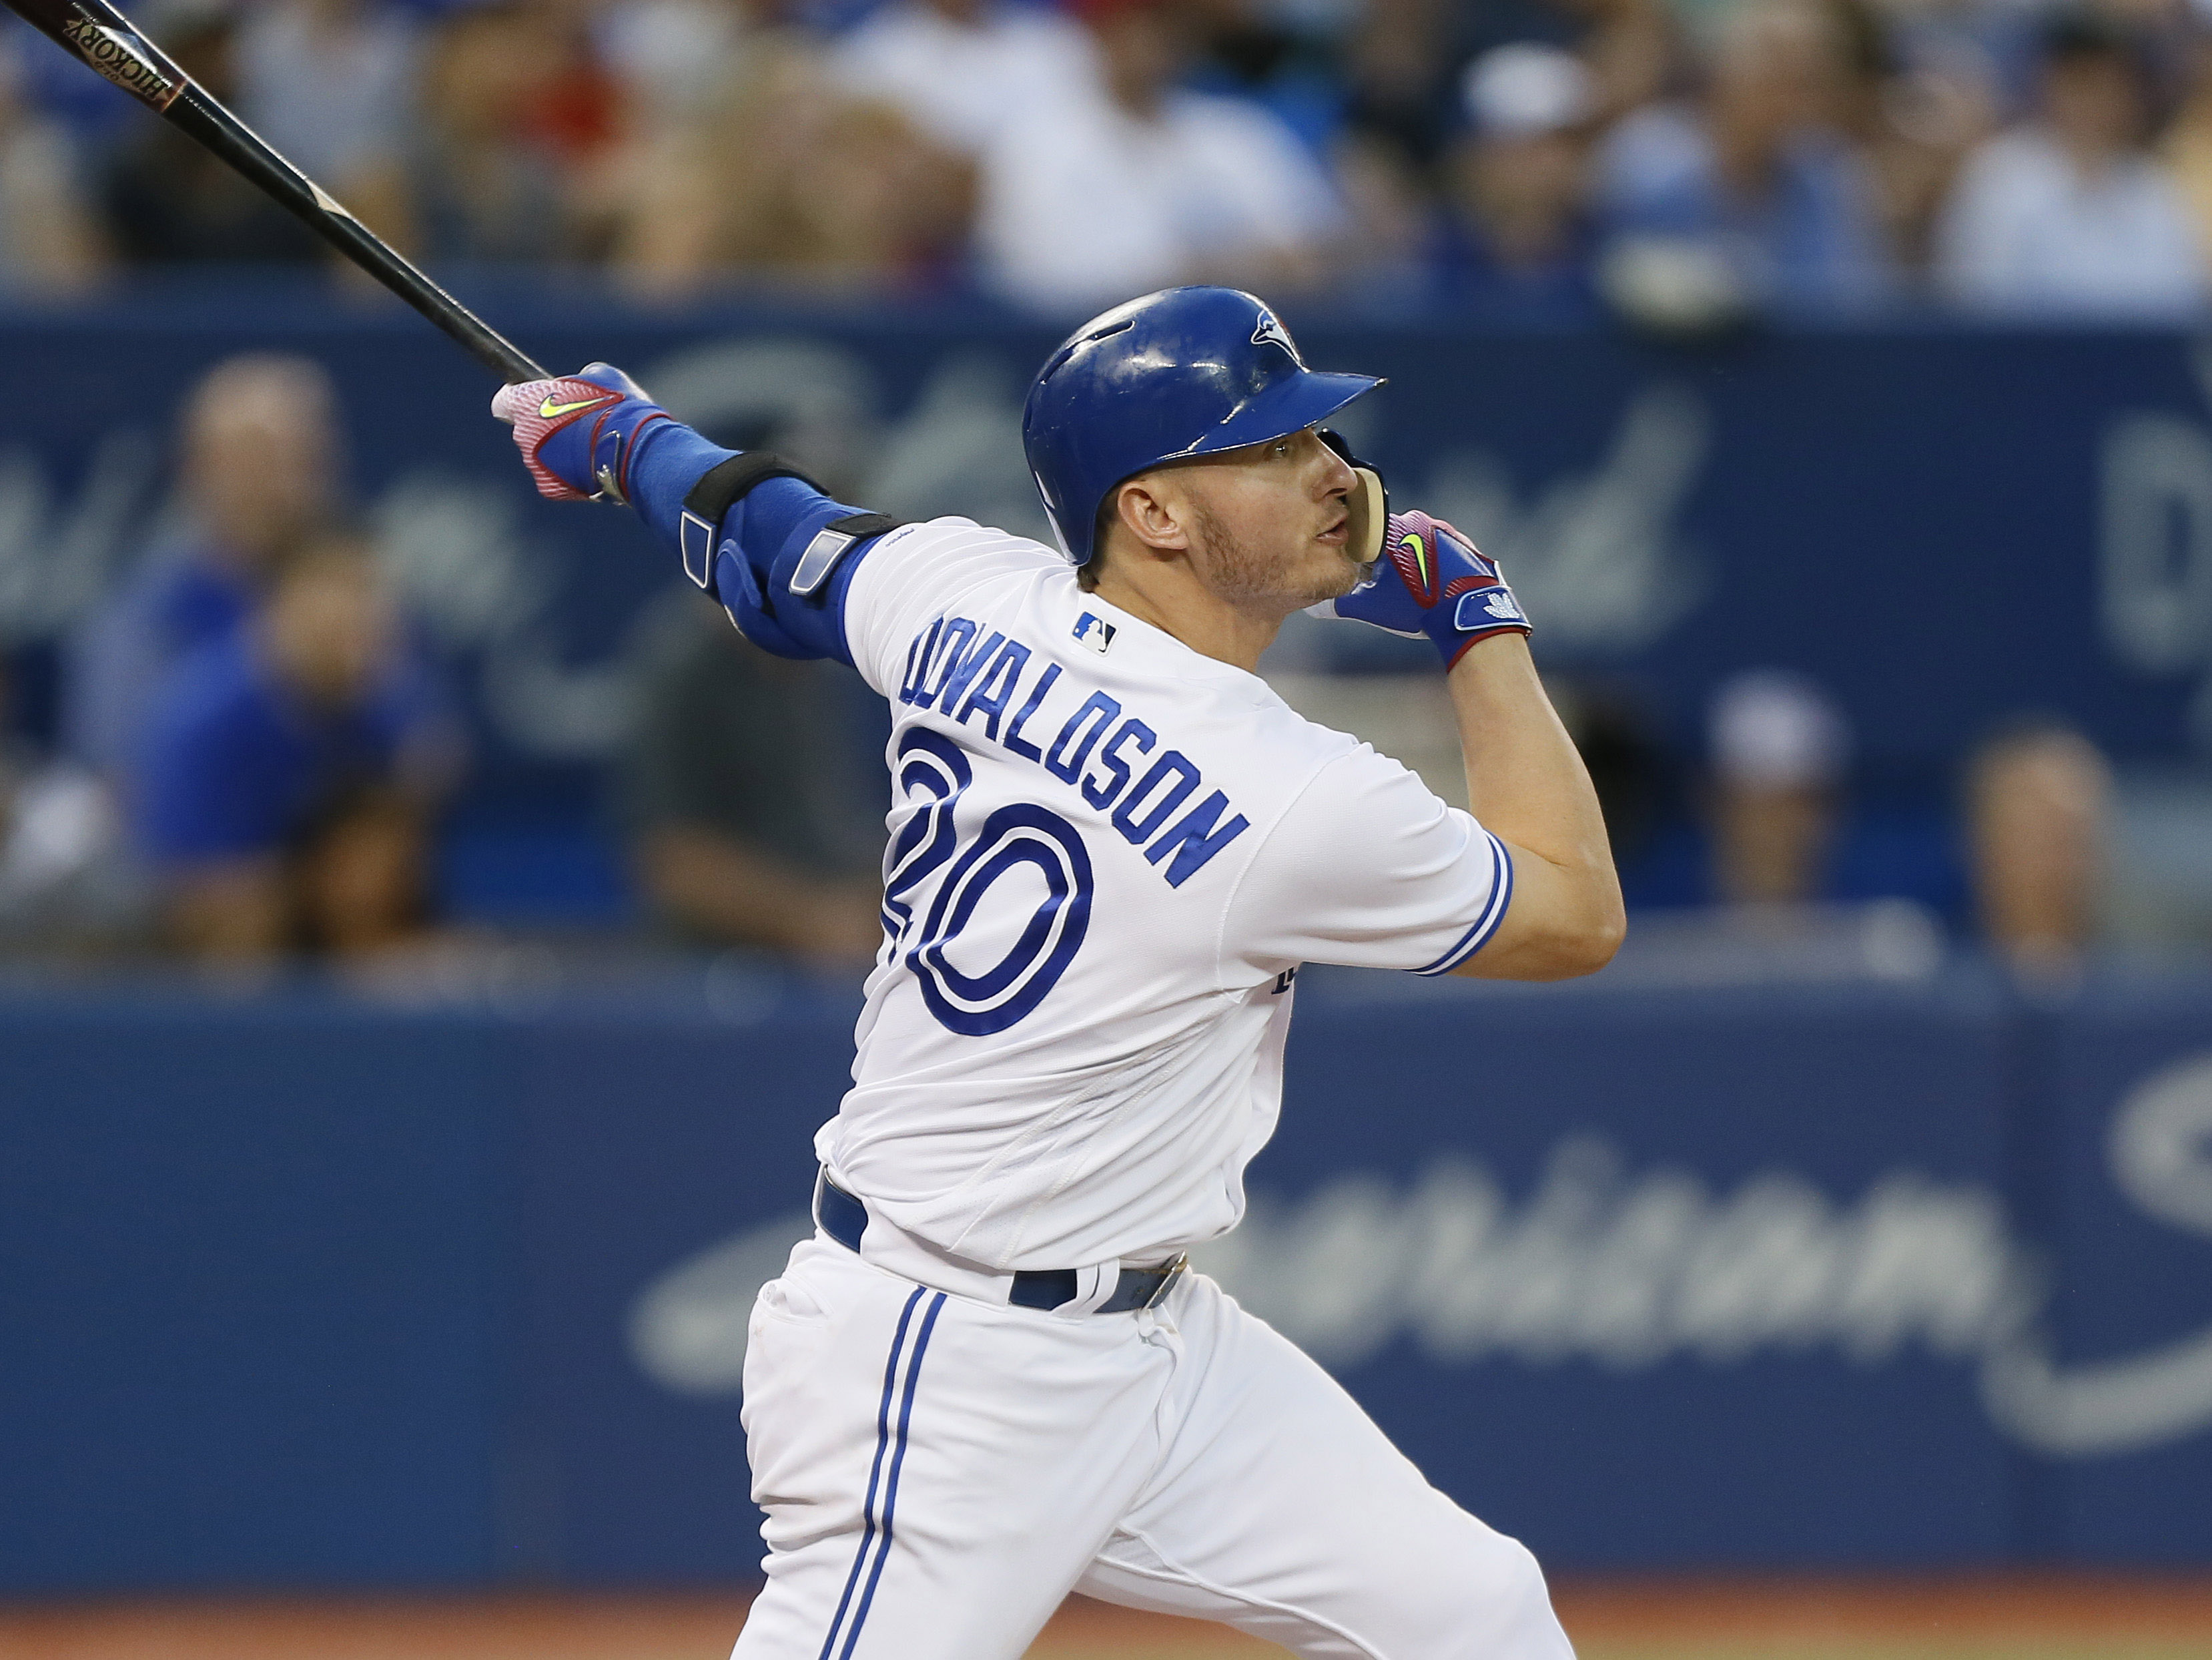 Josh Donaldson is the Fifth Best Player in MLB Right Now